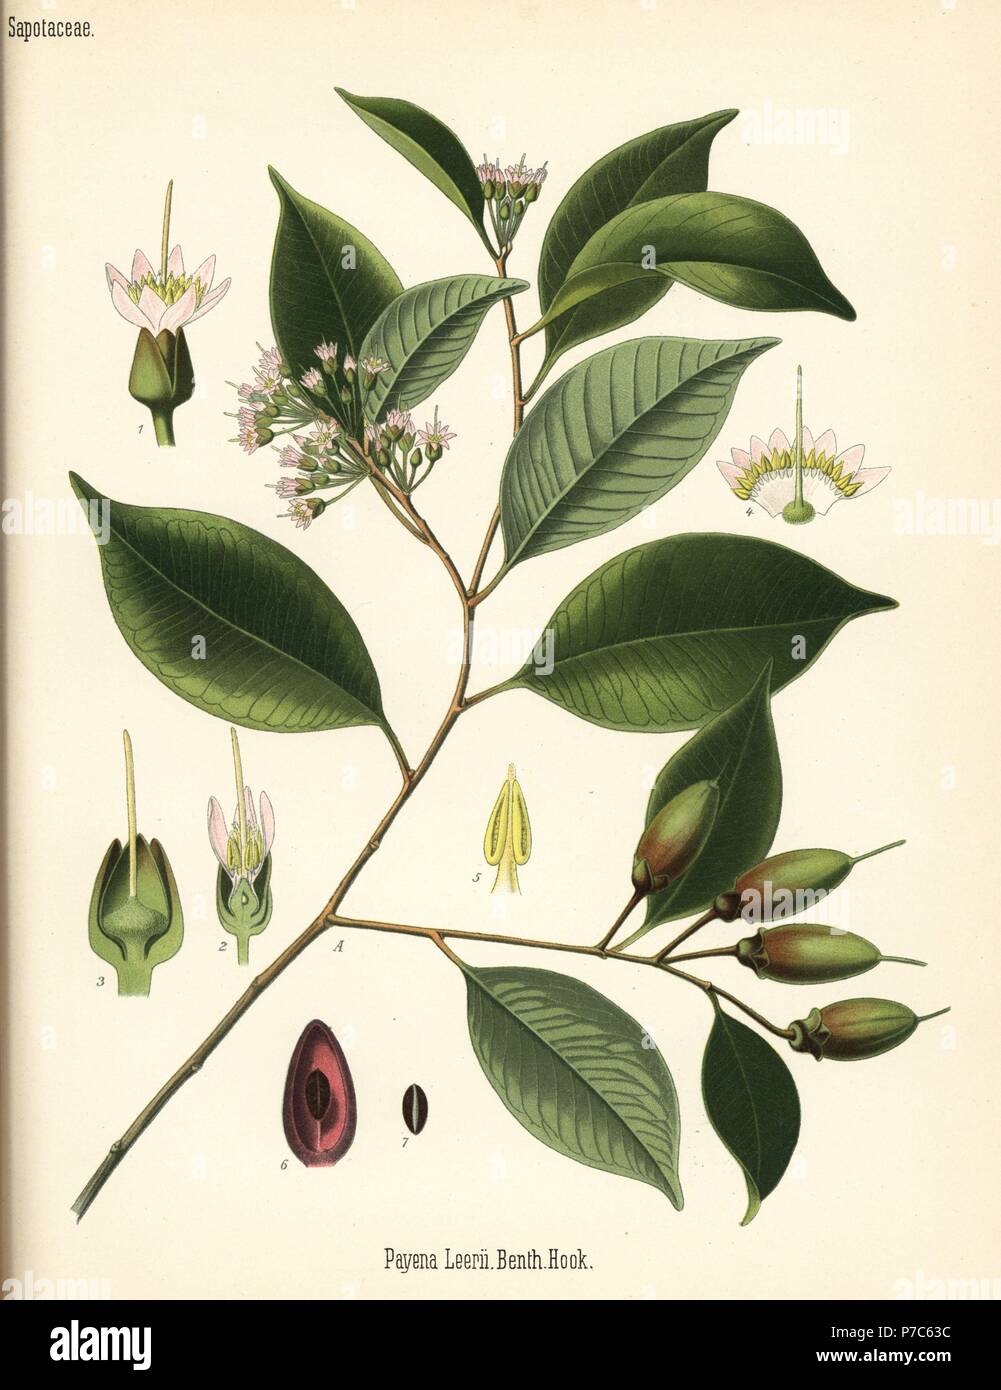 Gutta percha tree, Payena leerii. Chromolithograph after a botanical illustration from Hermann Adolph Koehler's Medicinal Plants, edited by Gustav Pabst, Koehler, Germany, 1887. Stock Photo